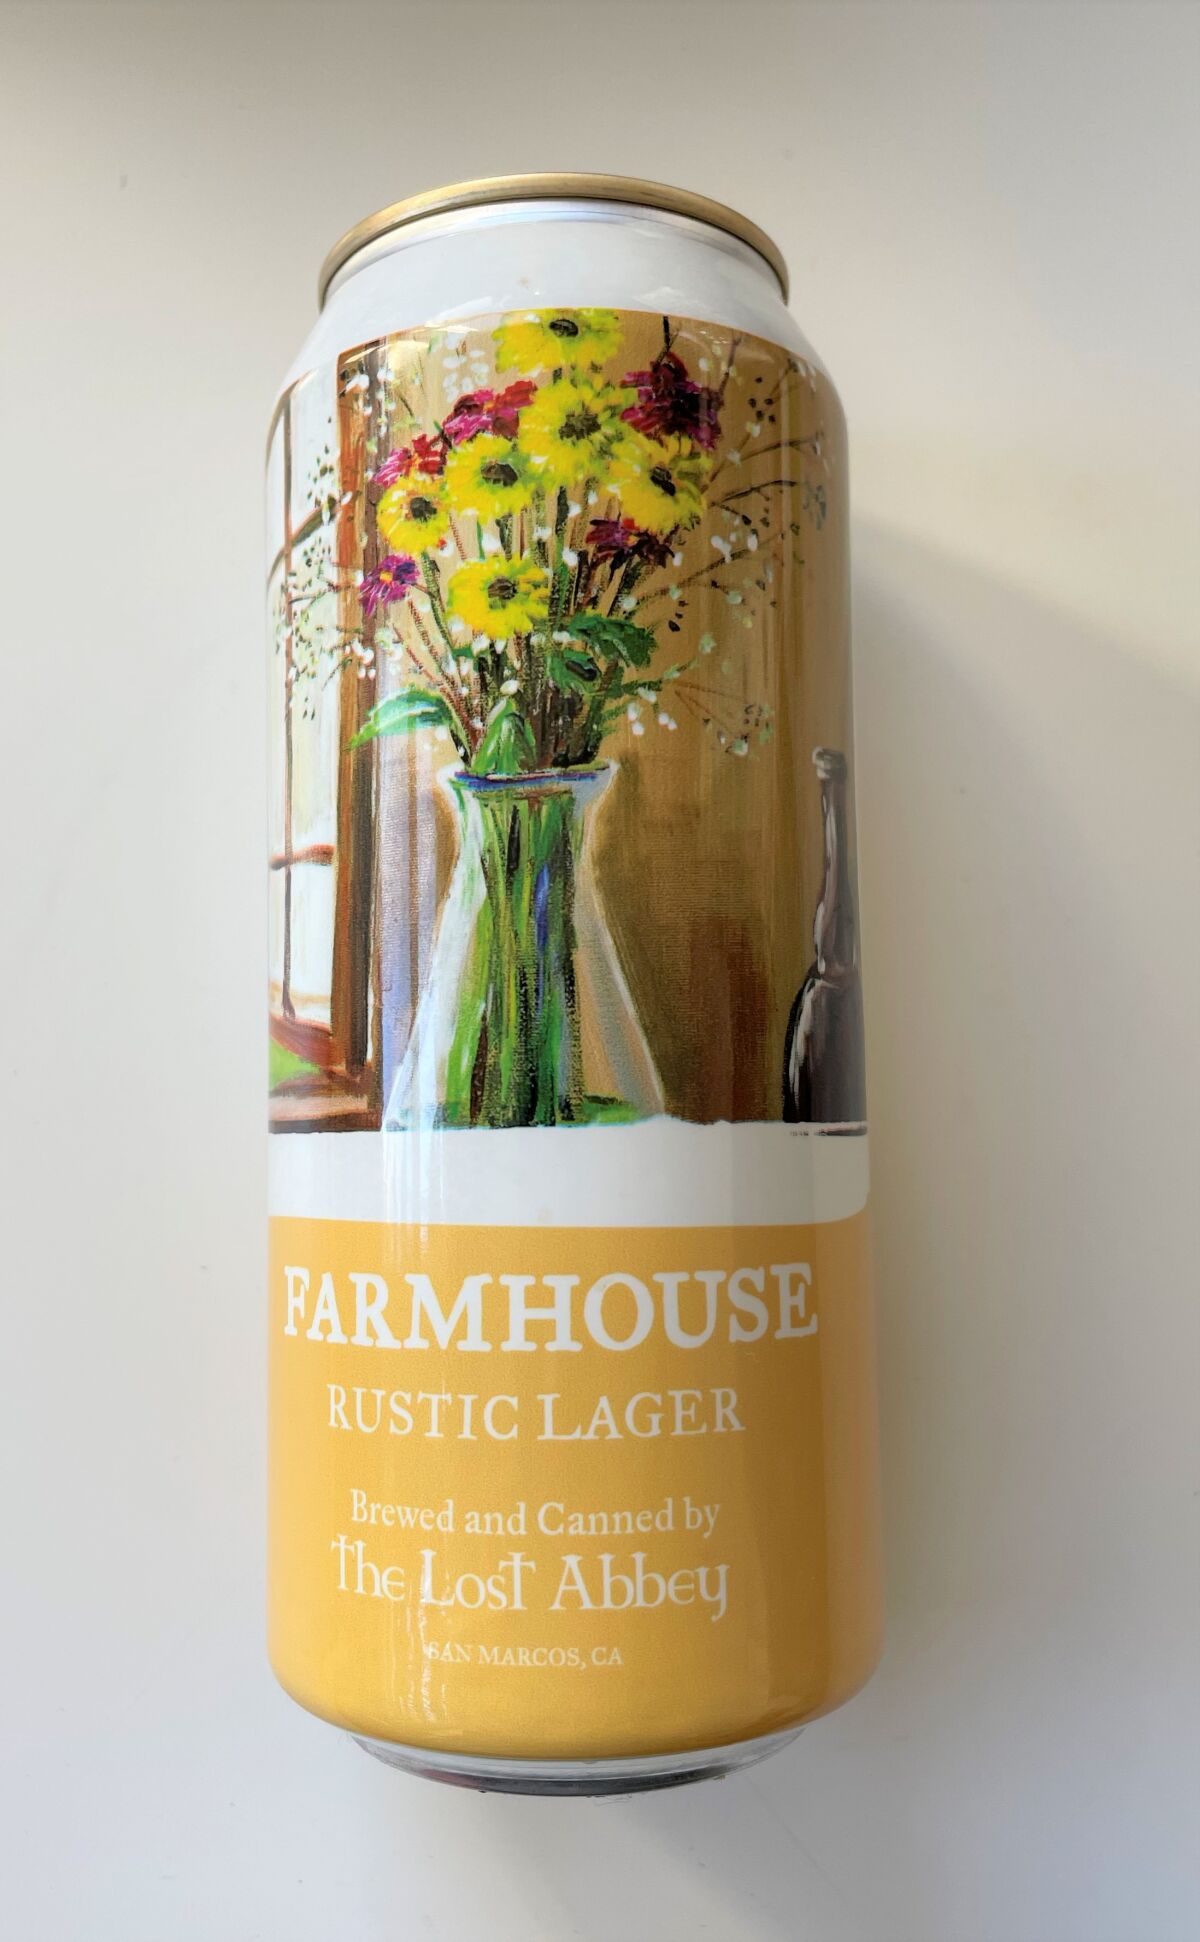 Lost Abbey Farmhouse Rustic Lager beer.